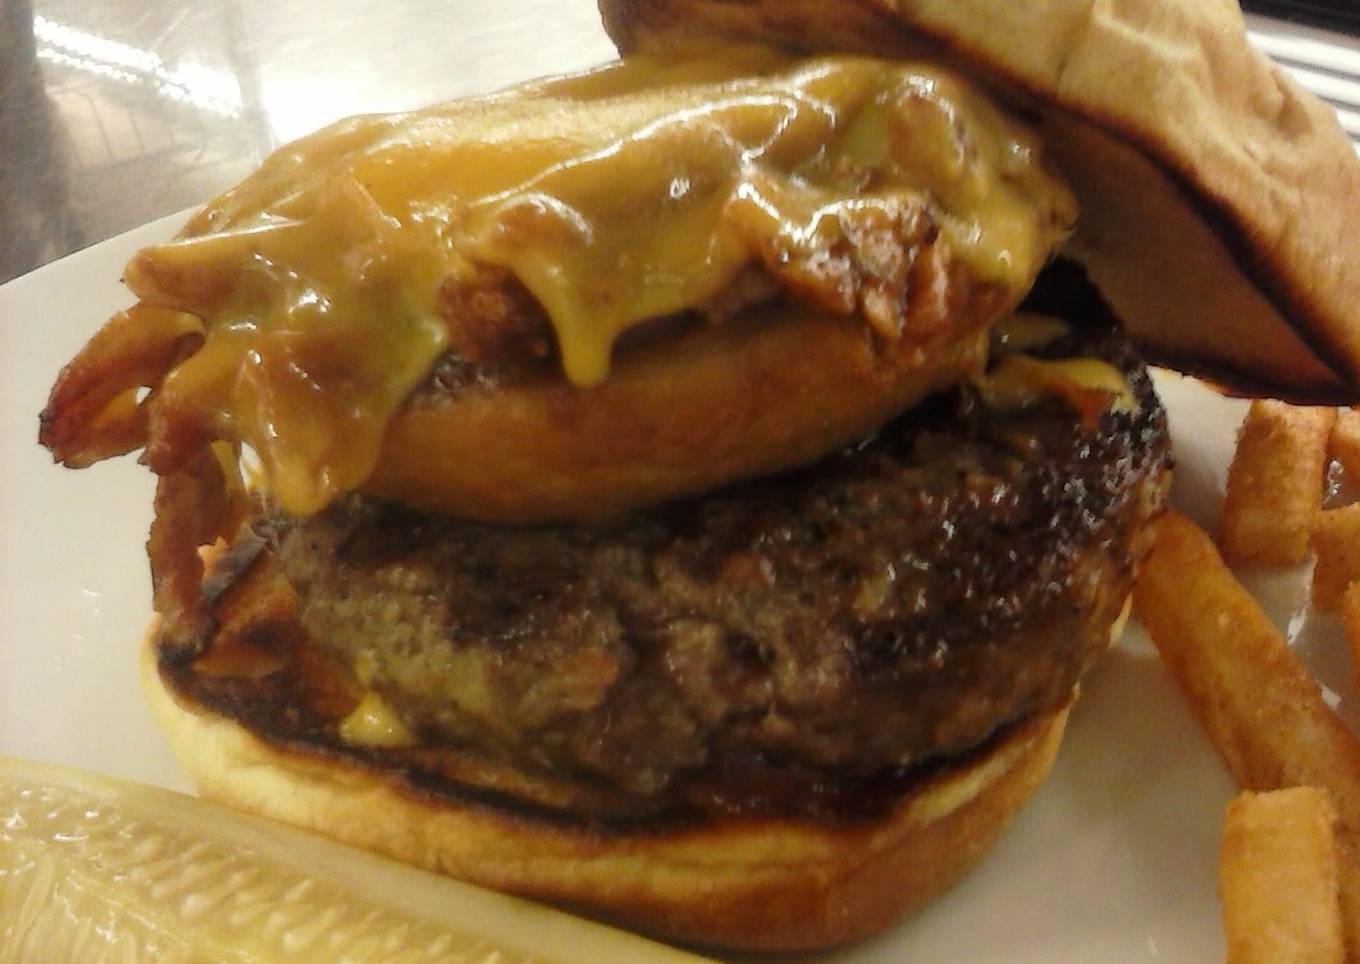 Beef Tender loin burger with pulled pork stuffed onion ring and melted cheddar cheese